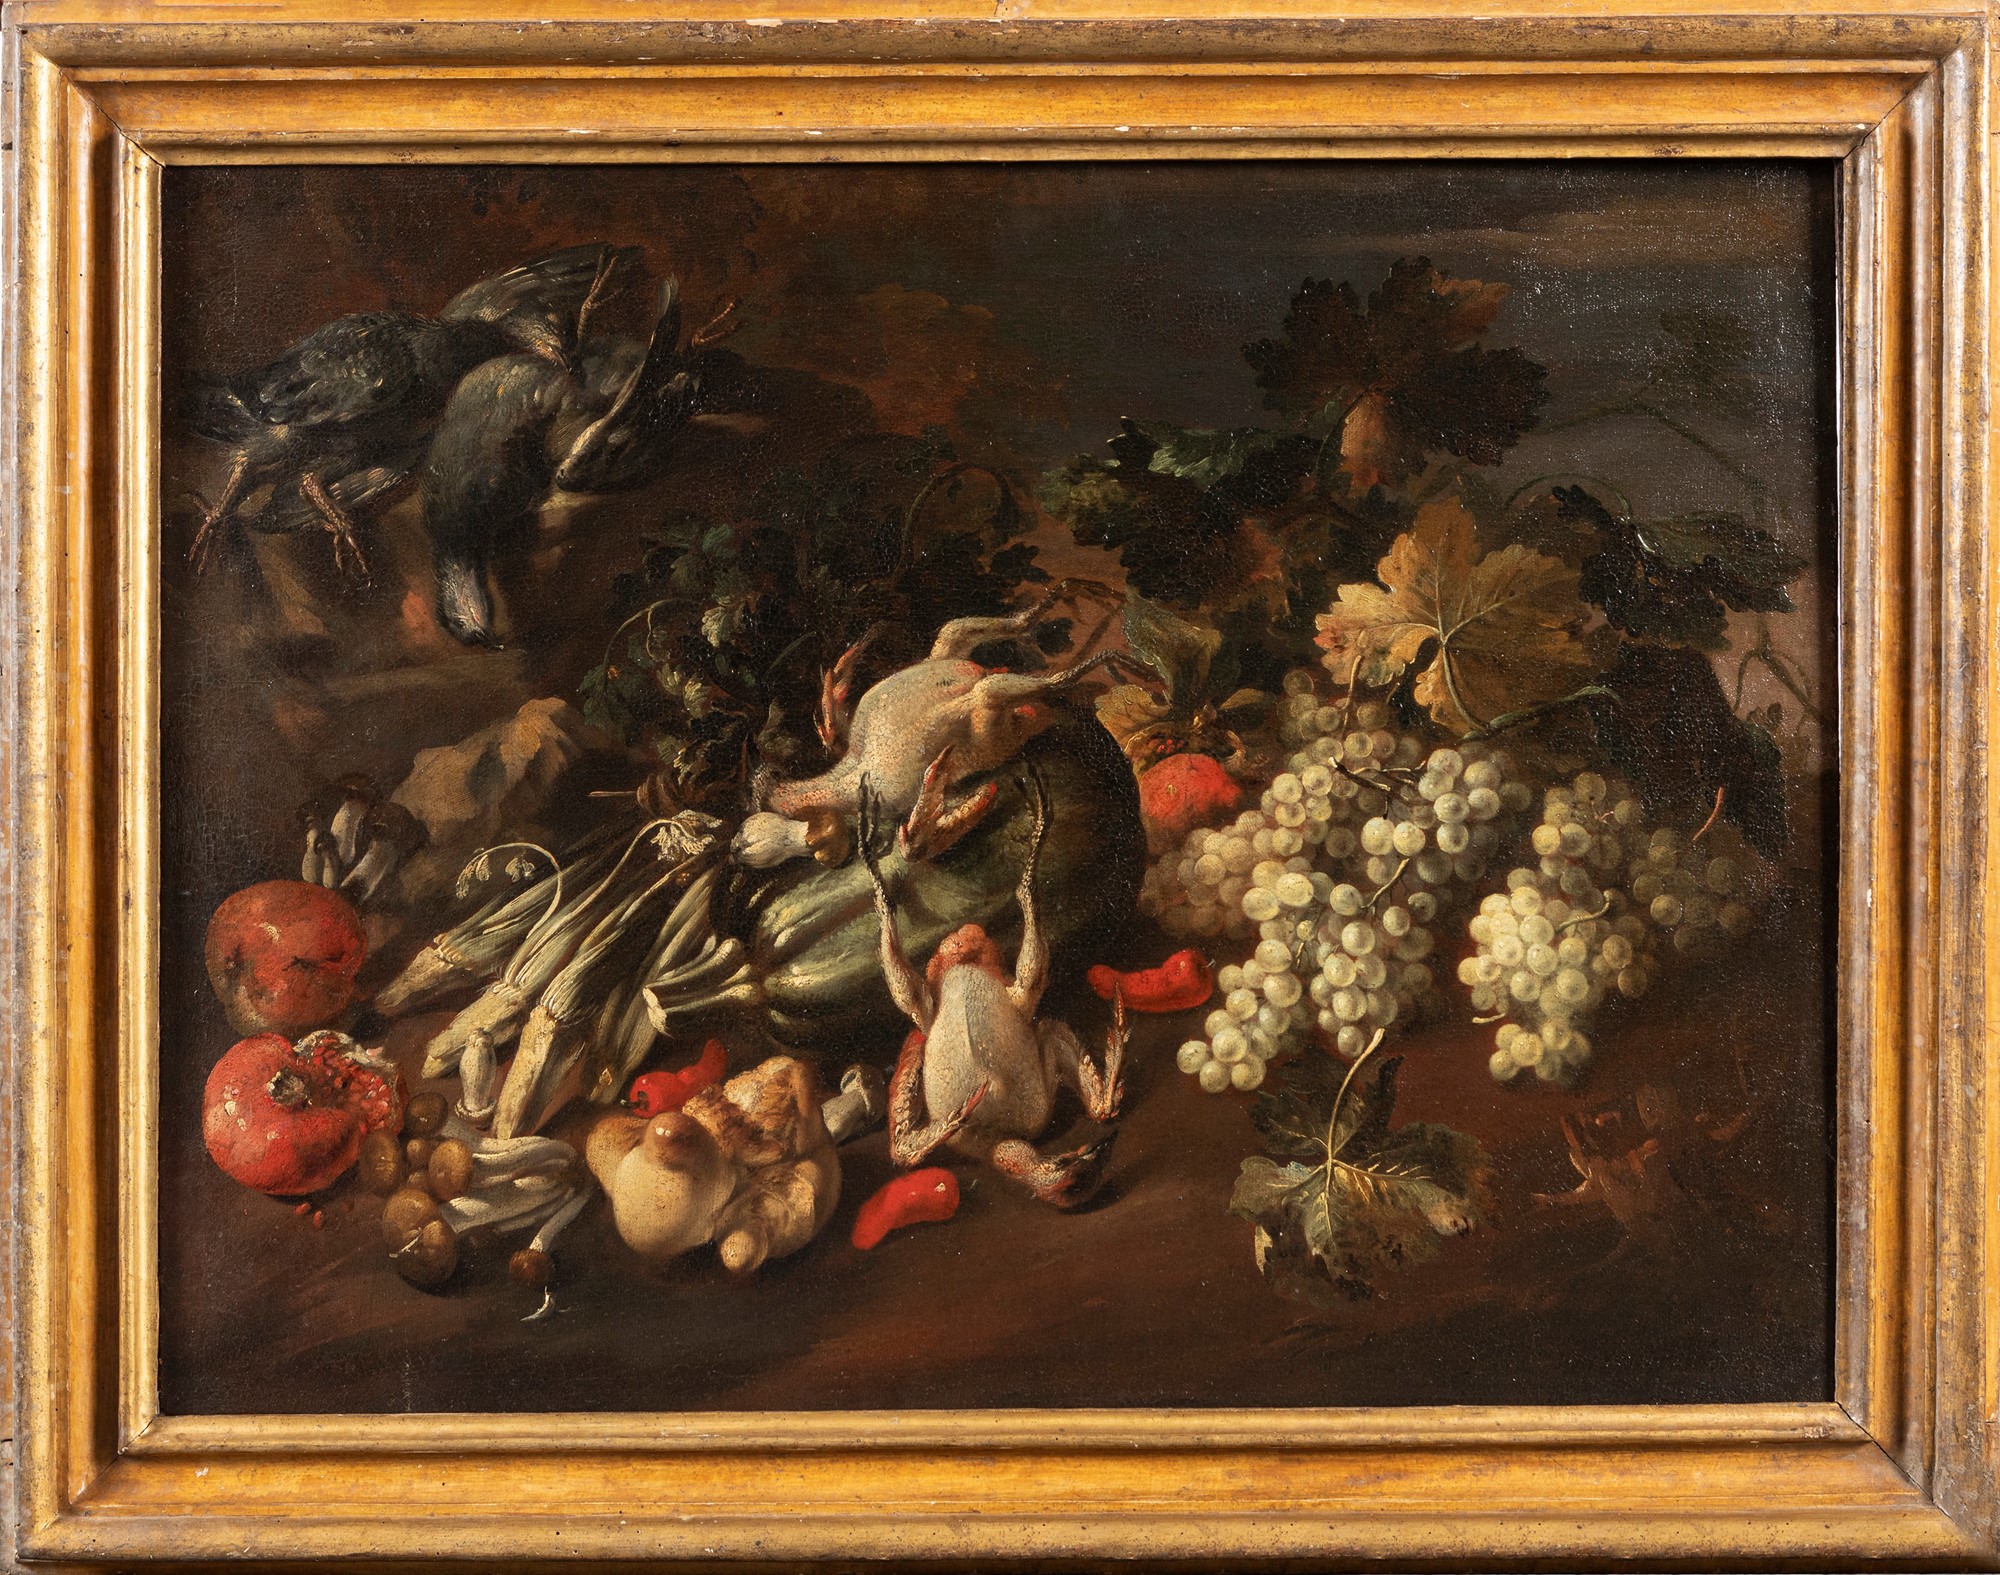 Felice Boselli (Piacenza 1650-Parma 1732) - Game, fruits and vegetables - Image 2 of 7